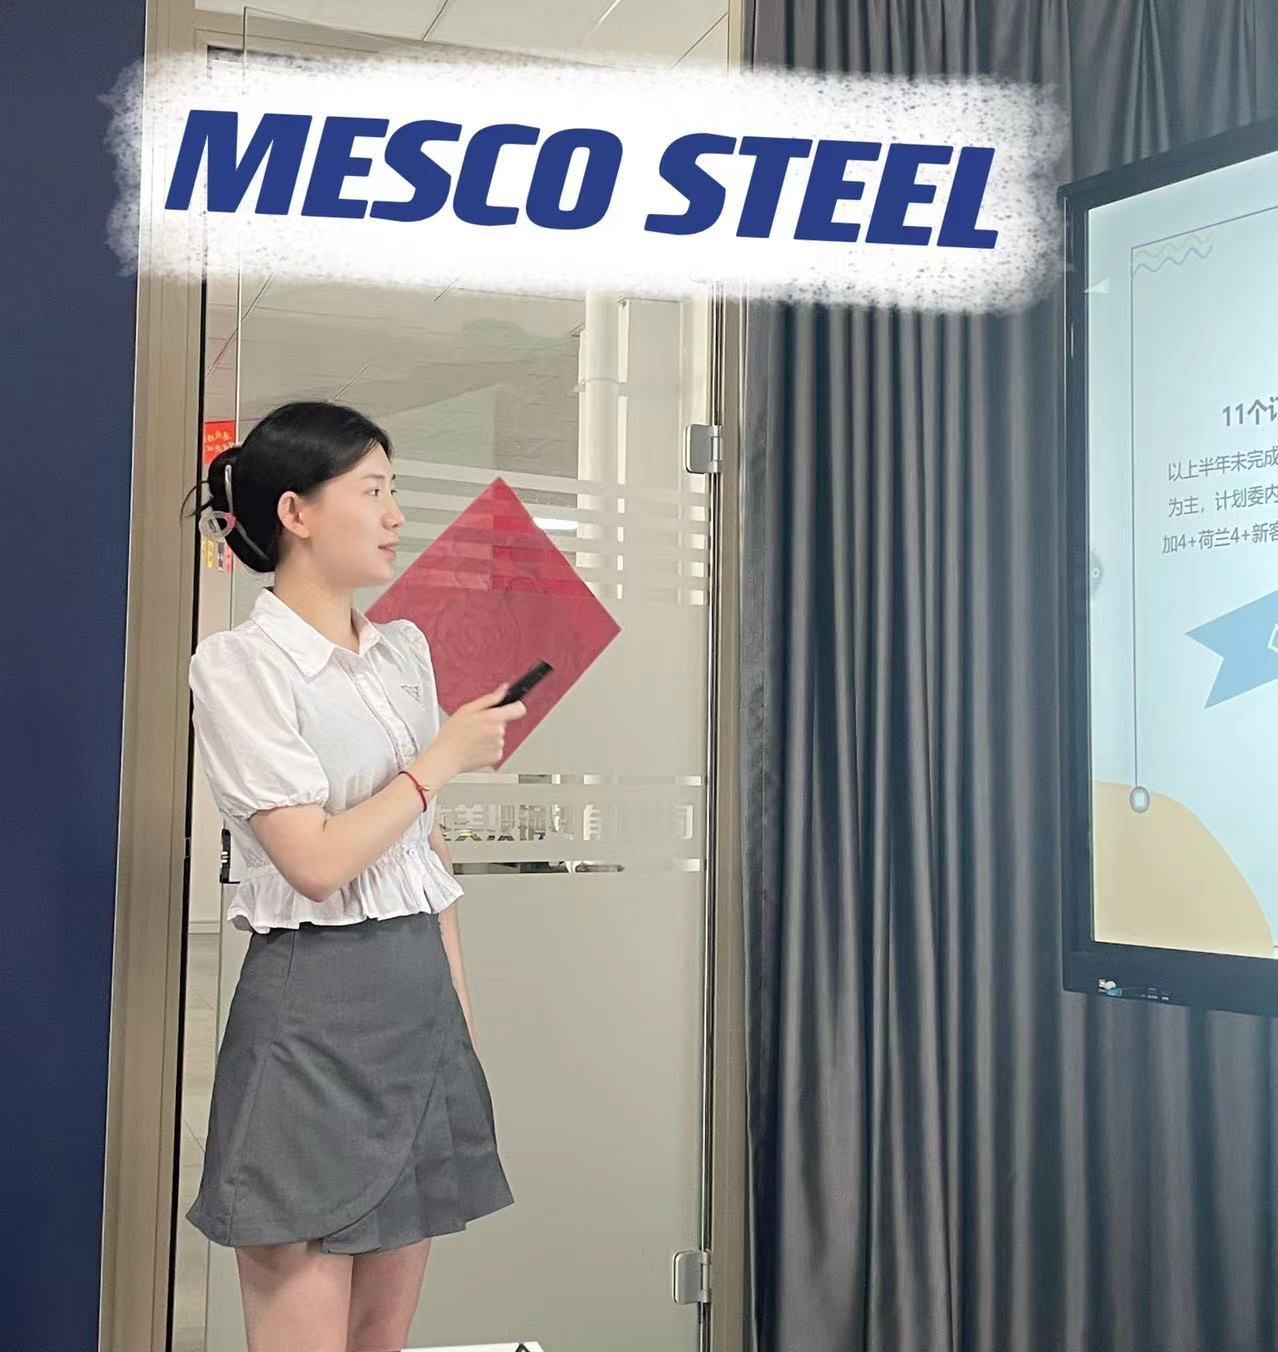 MESCO STEEL's Mid-Year Review Conference Celebrates Achievements and Recognizes Outstanding Employee